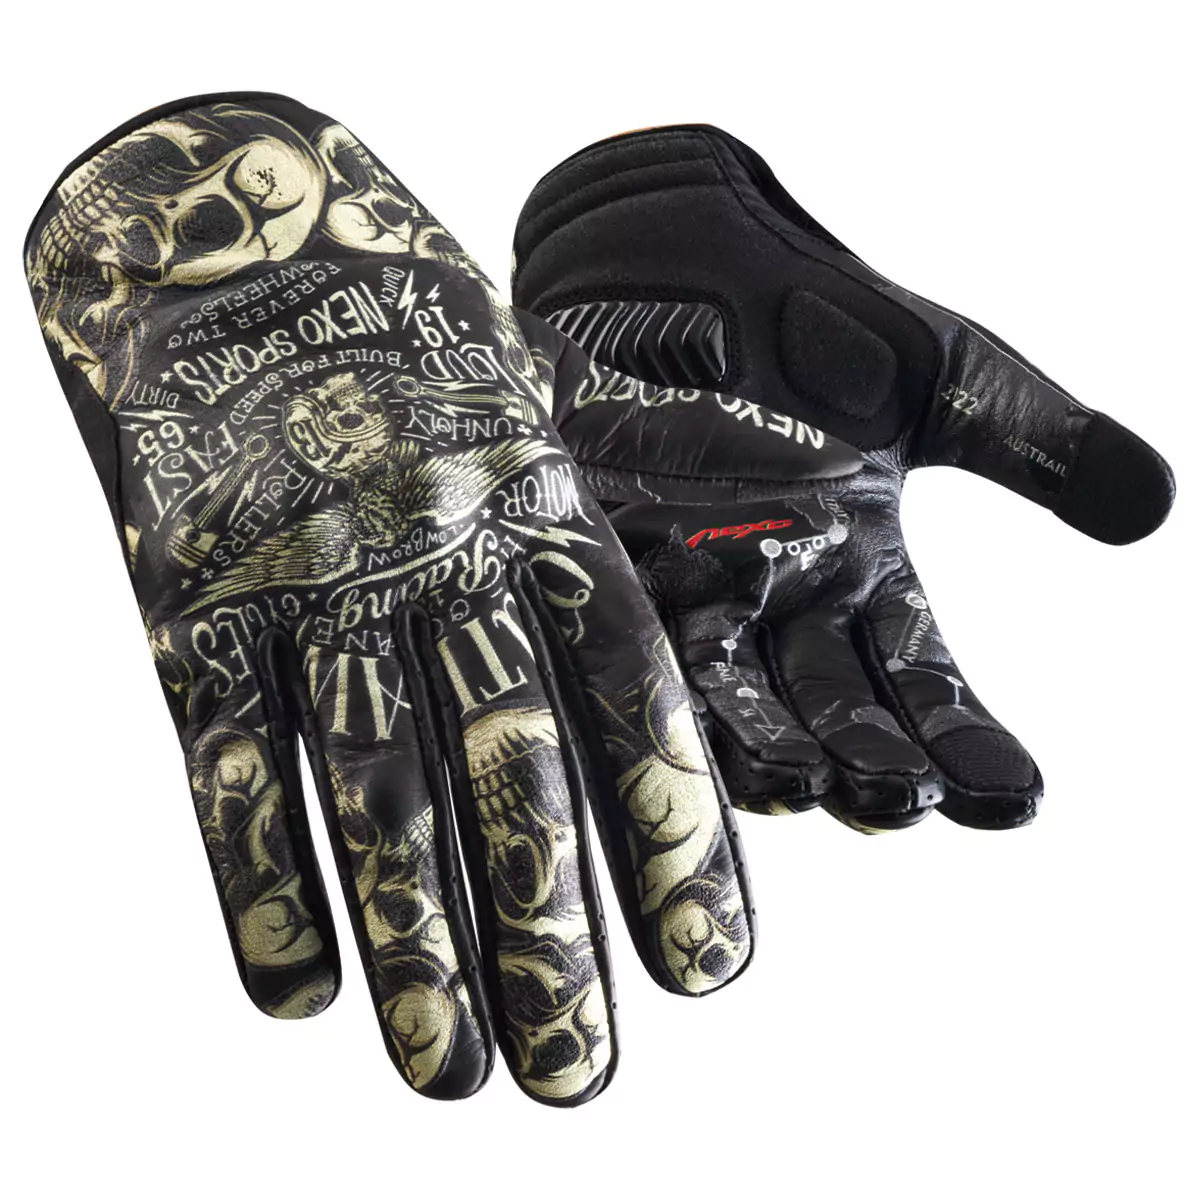 Pair of lightweight and breathable summer race motorcycle gloves designed for comfort and grip.